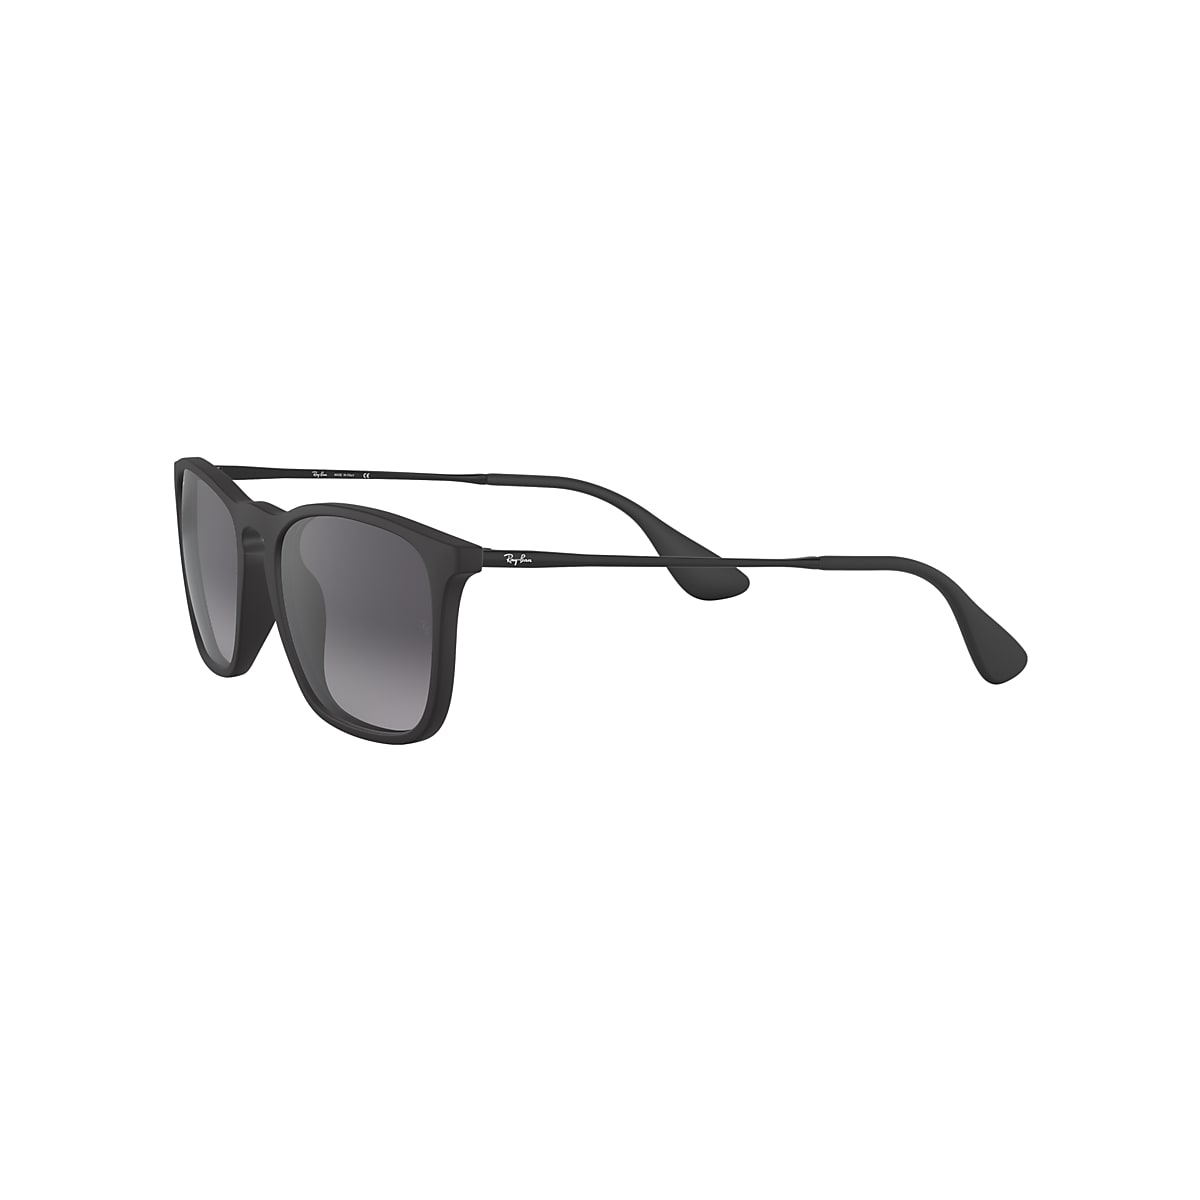 CHRIS Sunglasses in Black and Grey - RB4187 | Ray-Ban® US